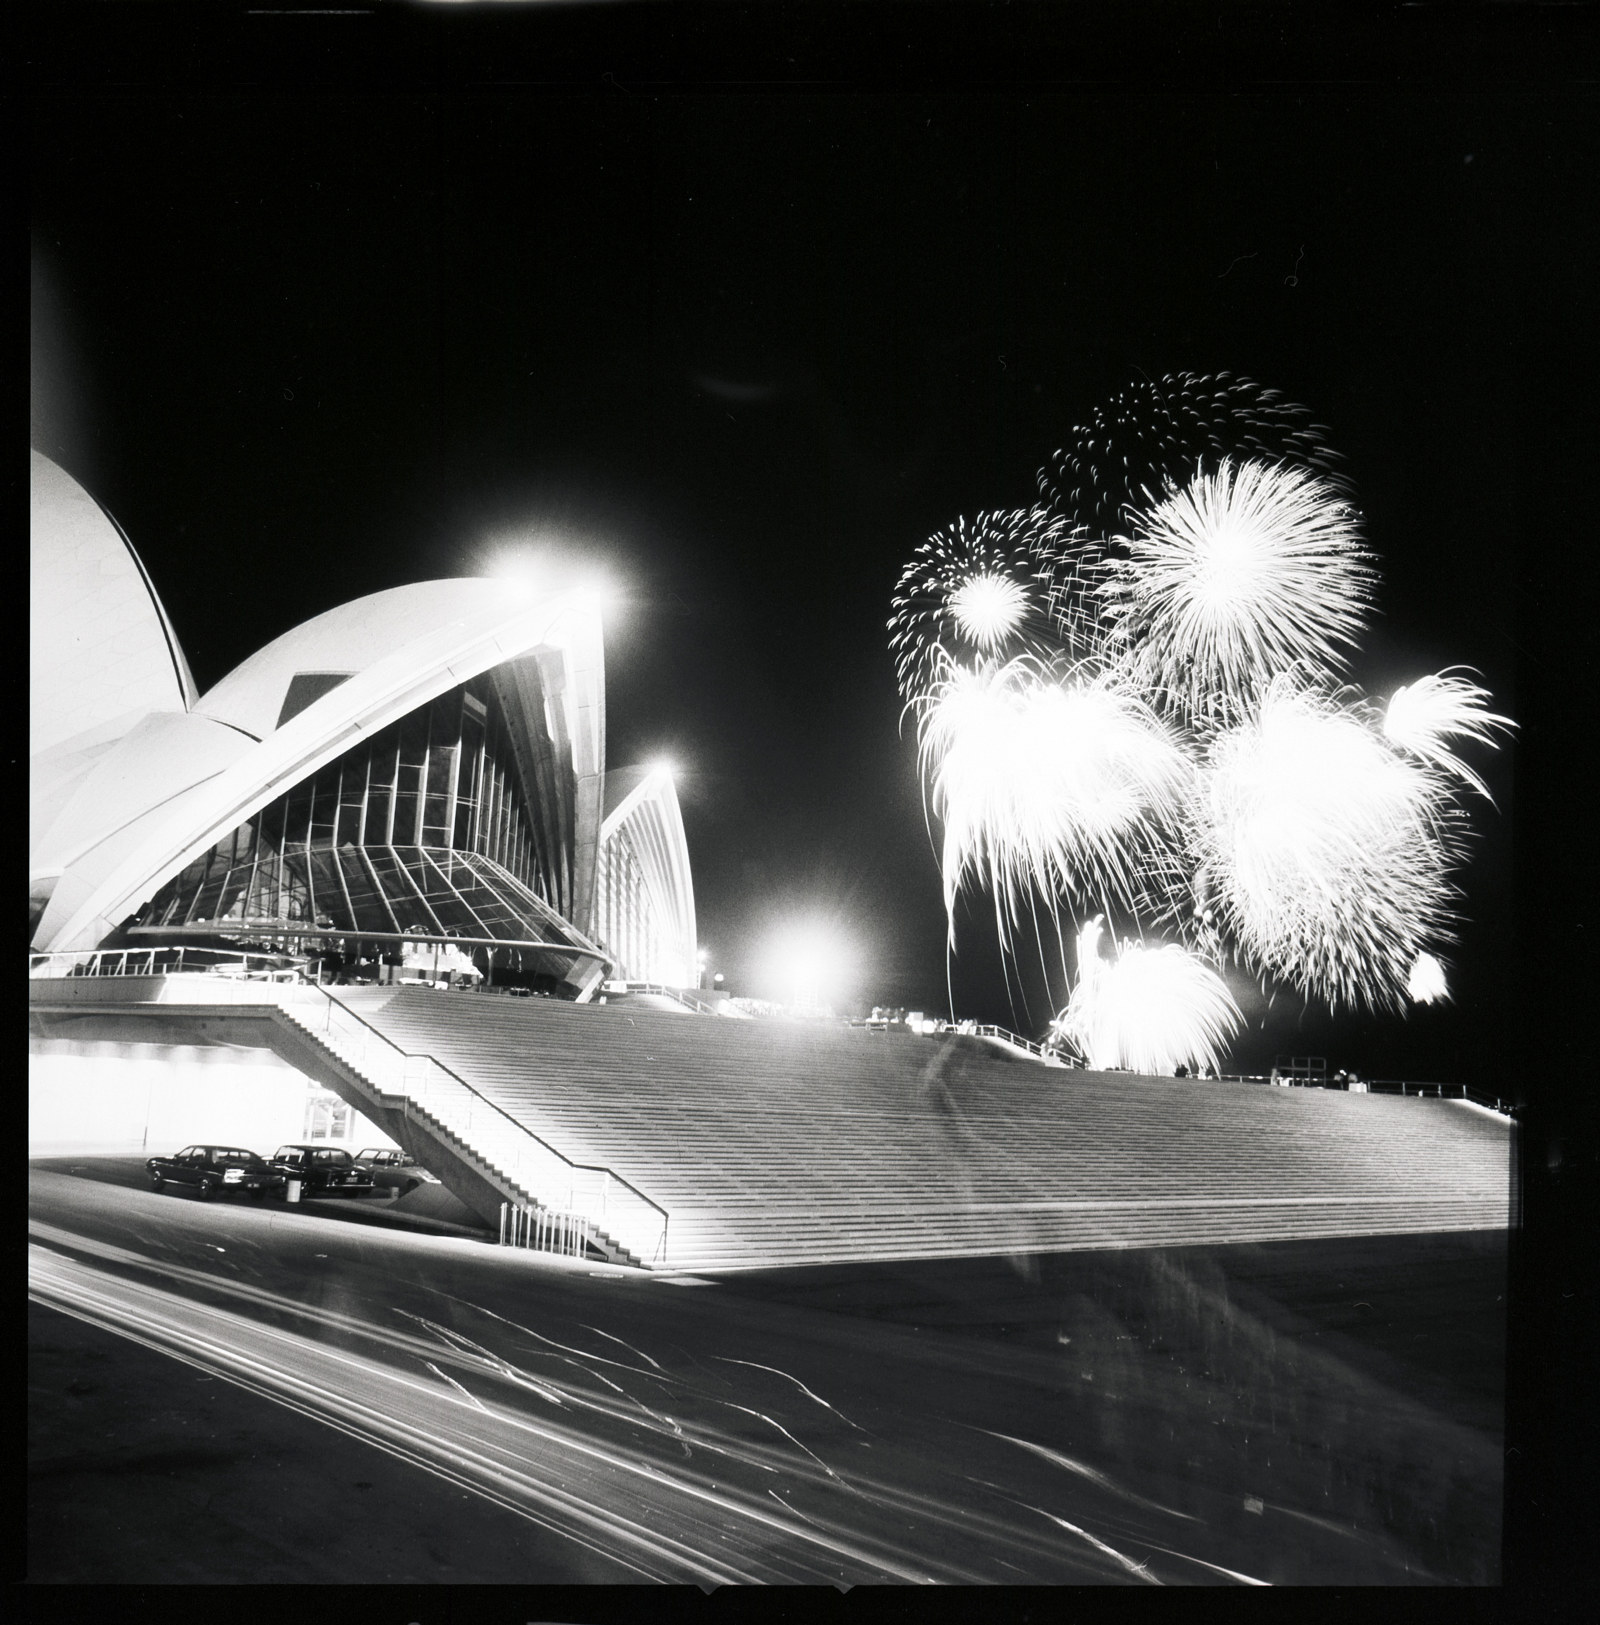 Fireworks above the Opera House on the night of the official opening, before the commencement of the opening concert. October 20th 1973.